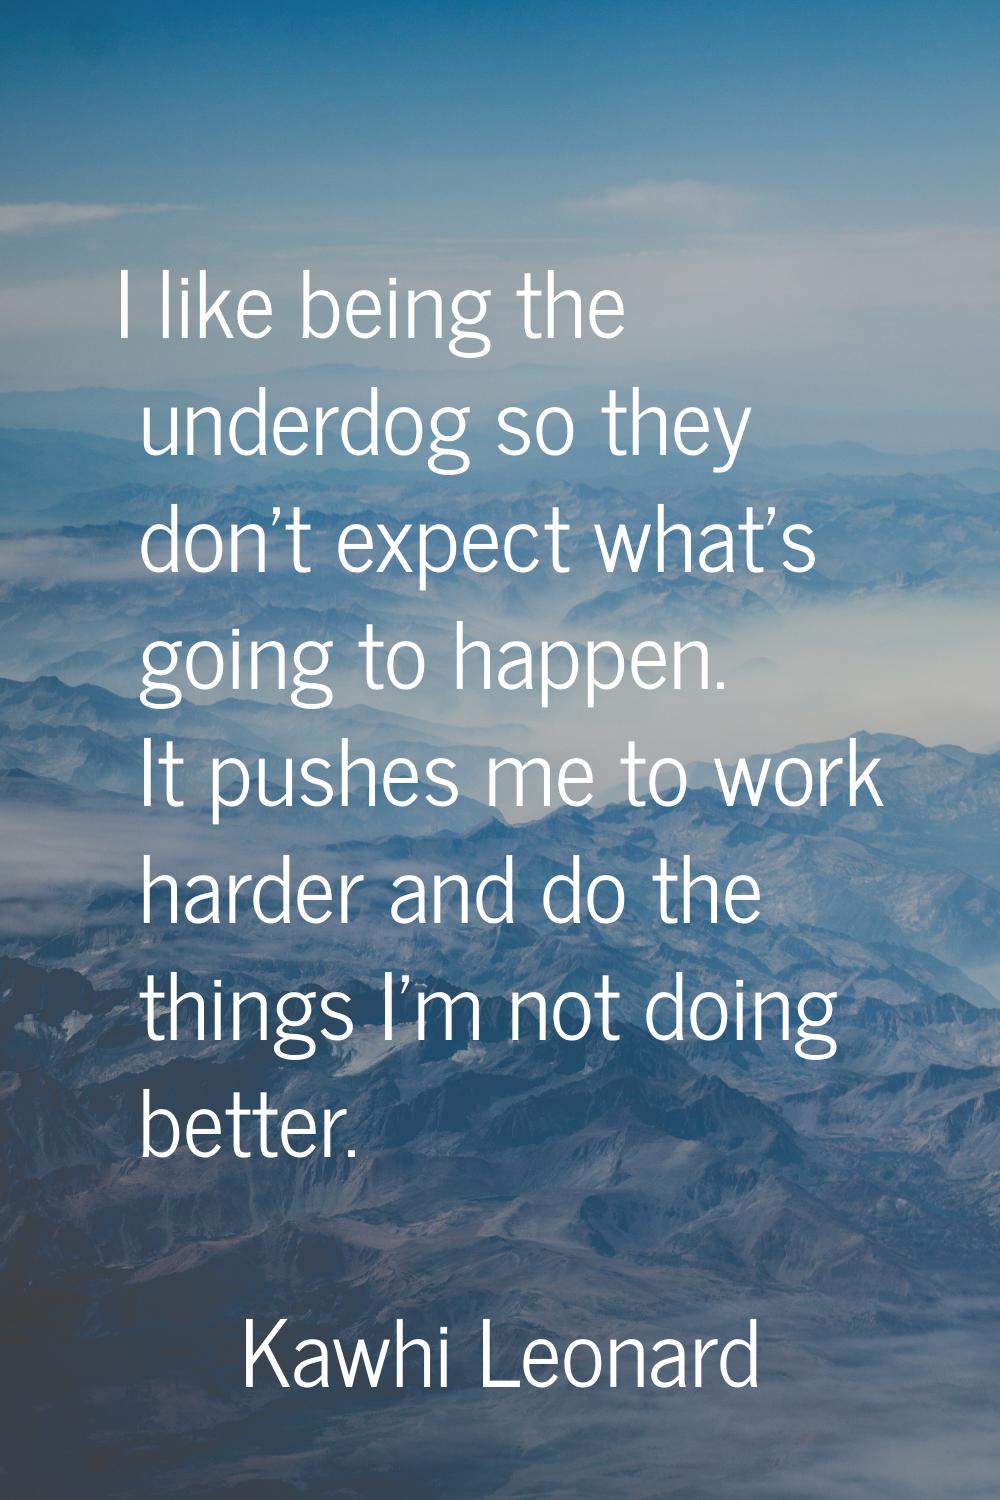 I like being the underdog so they don't expect what's going to happen. It pushes me to work harder 